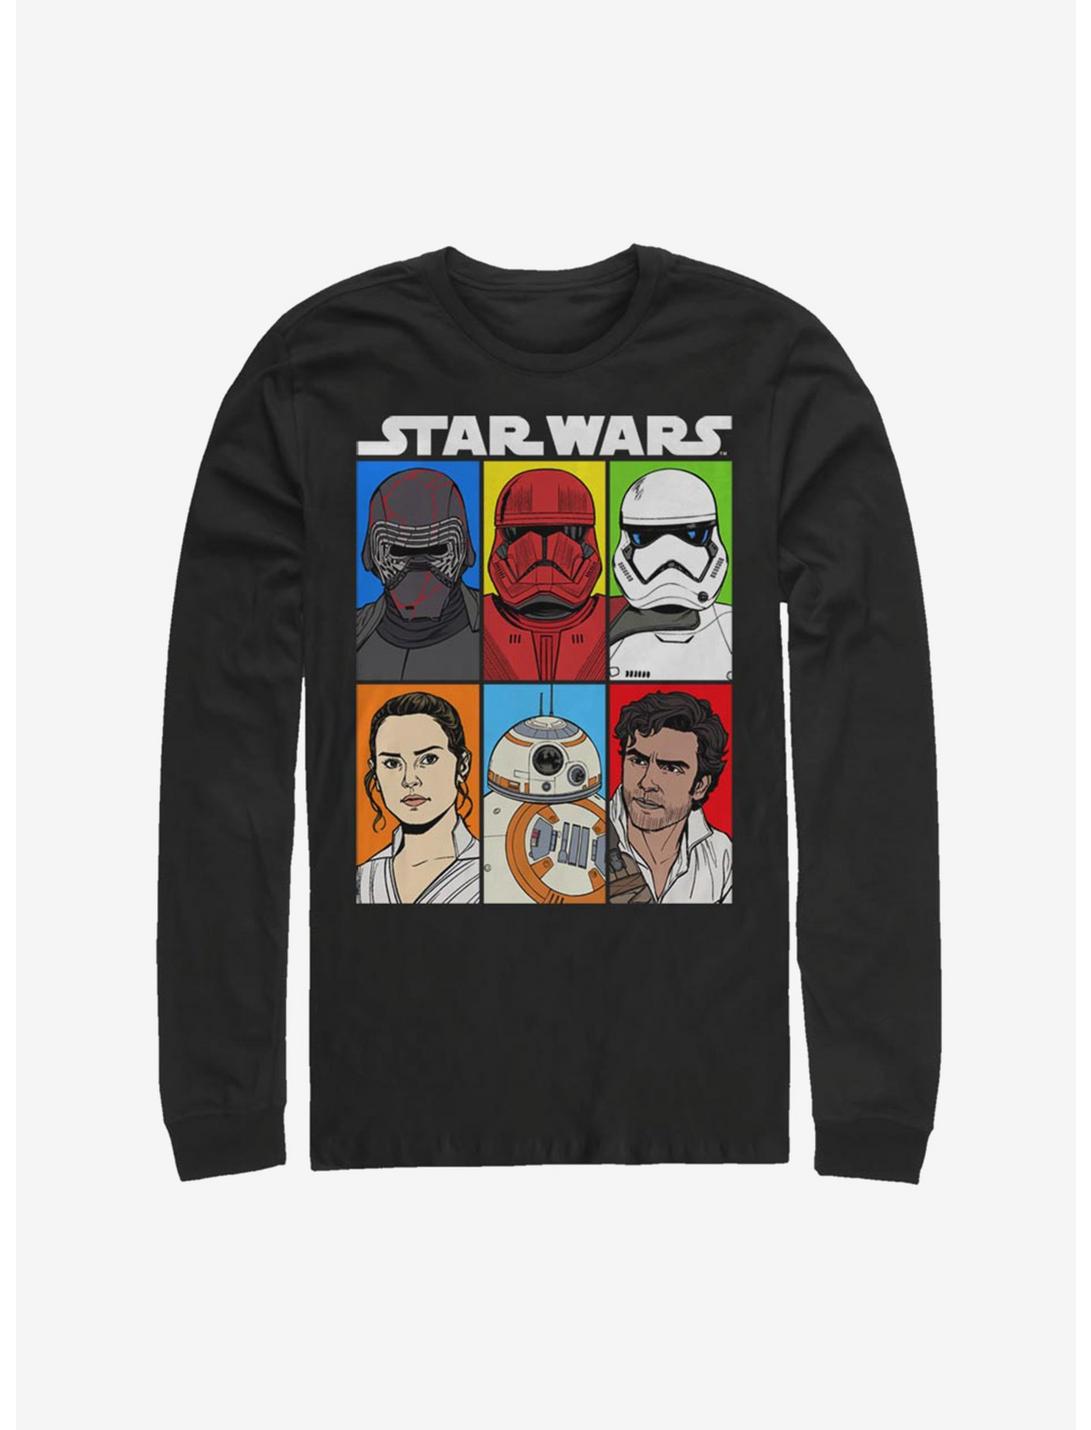 Star Wars Episode IX The Rise Of Skywalker Friends And Foes Long-Sleeve T-Shirt, BLACK, hi-res